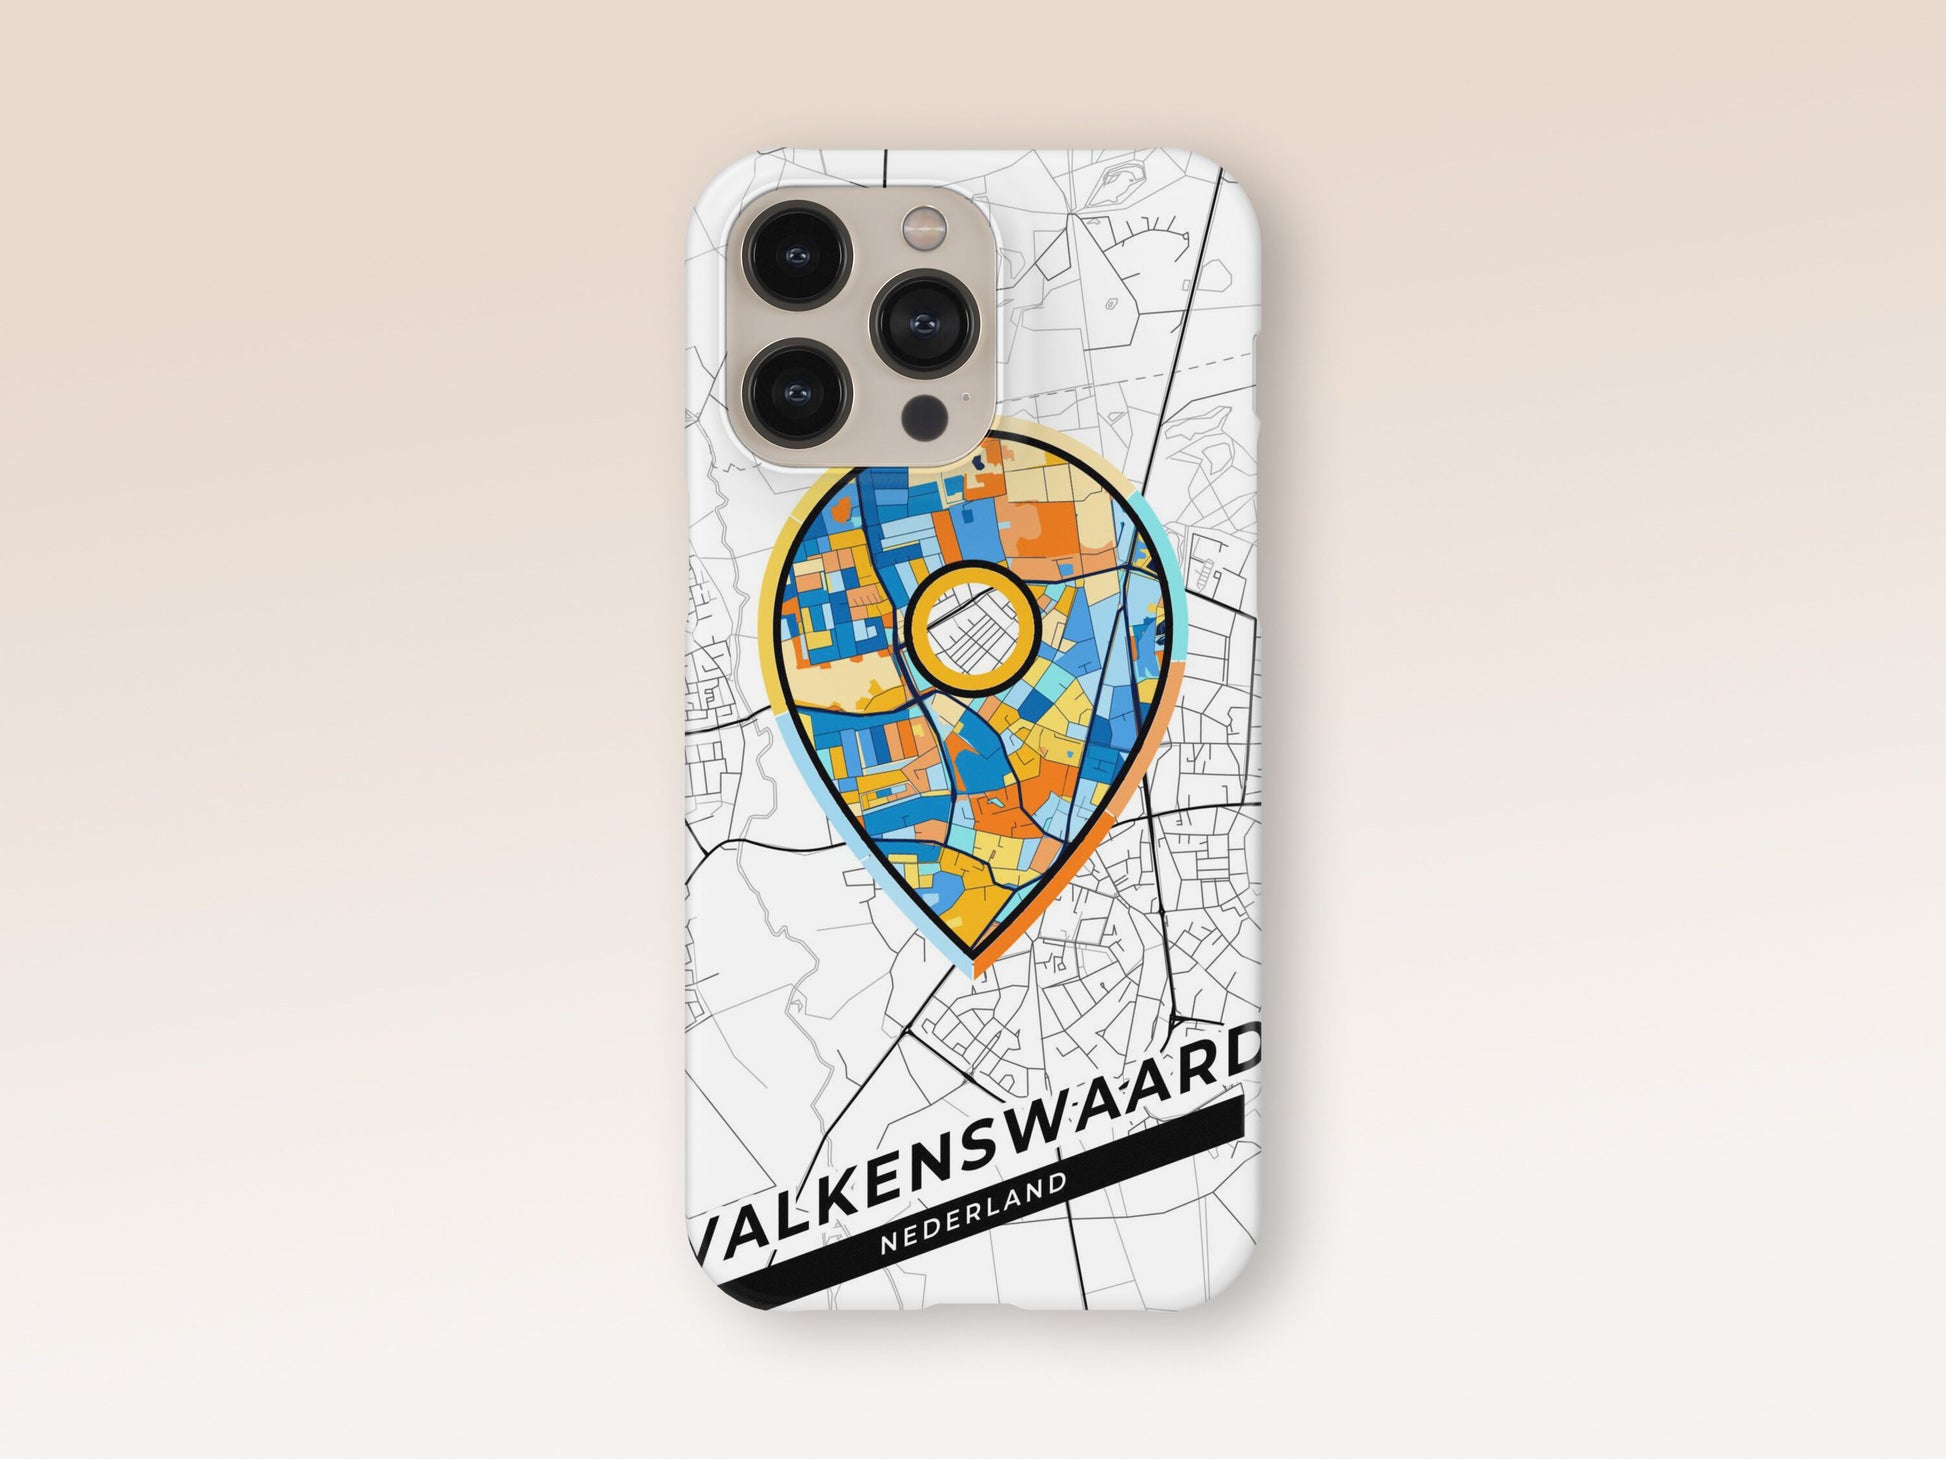 Valkenswaard Netherlands slim phone case with colorful icon 1